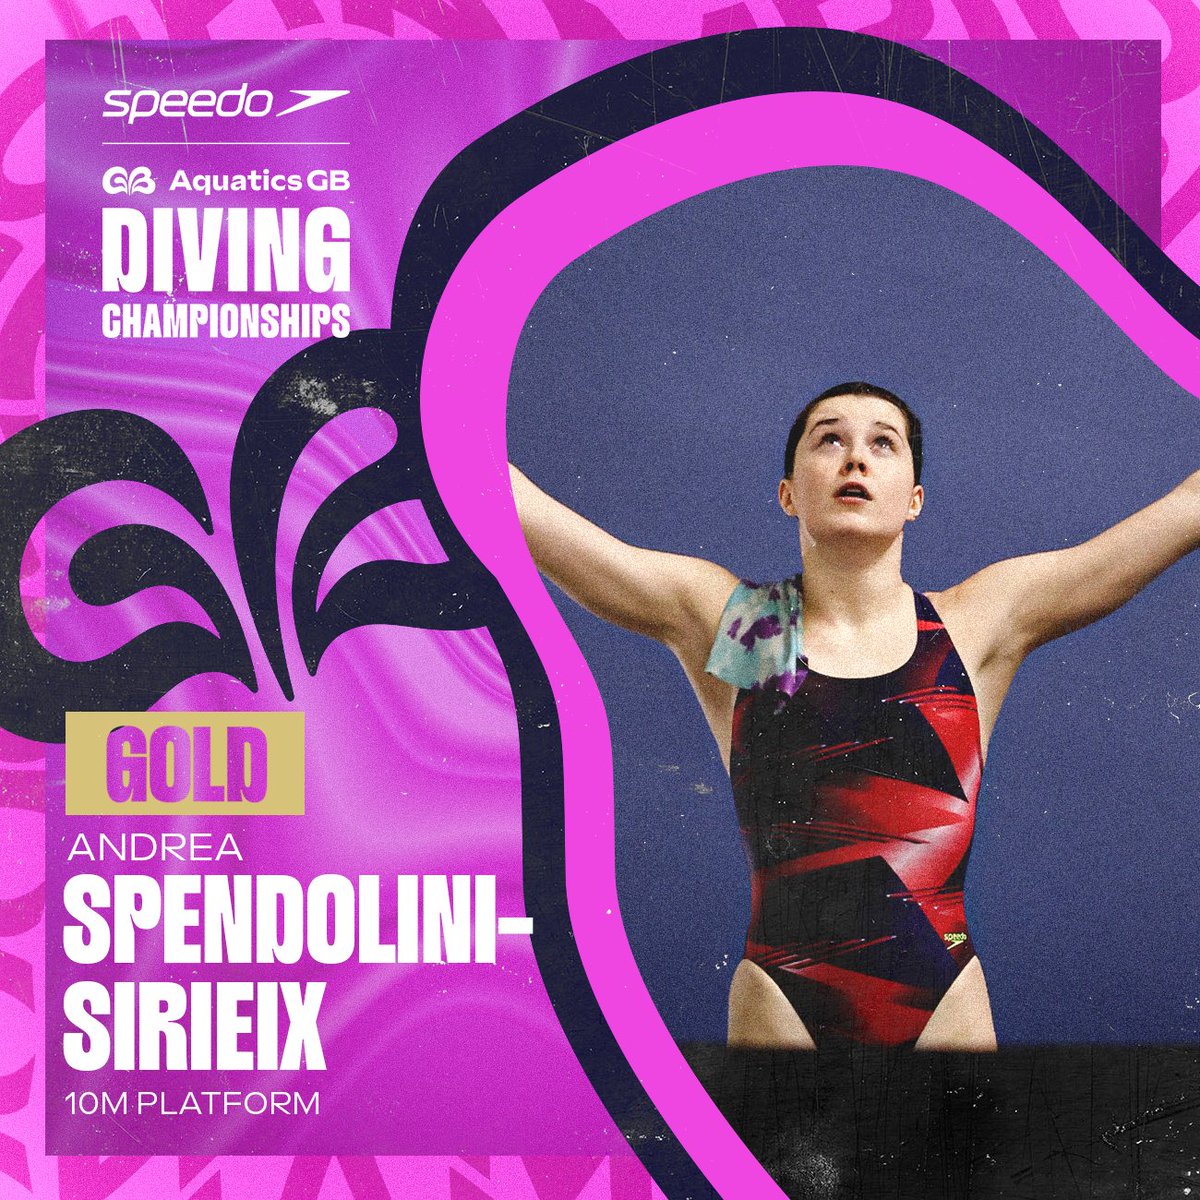 Sensational from Andrea Spendolini-Sirieix! 🔥🥇 Alongside securing the British title, her scores recorded in both the prelims and final meet the criteria for automatic nomination to contest the Women's 10m Platform at the Paris Olympics this summer 🗼🙌